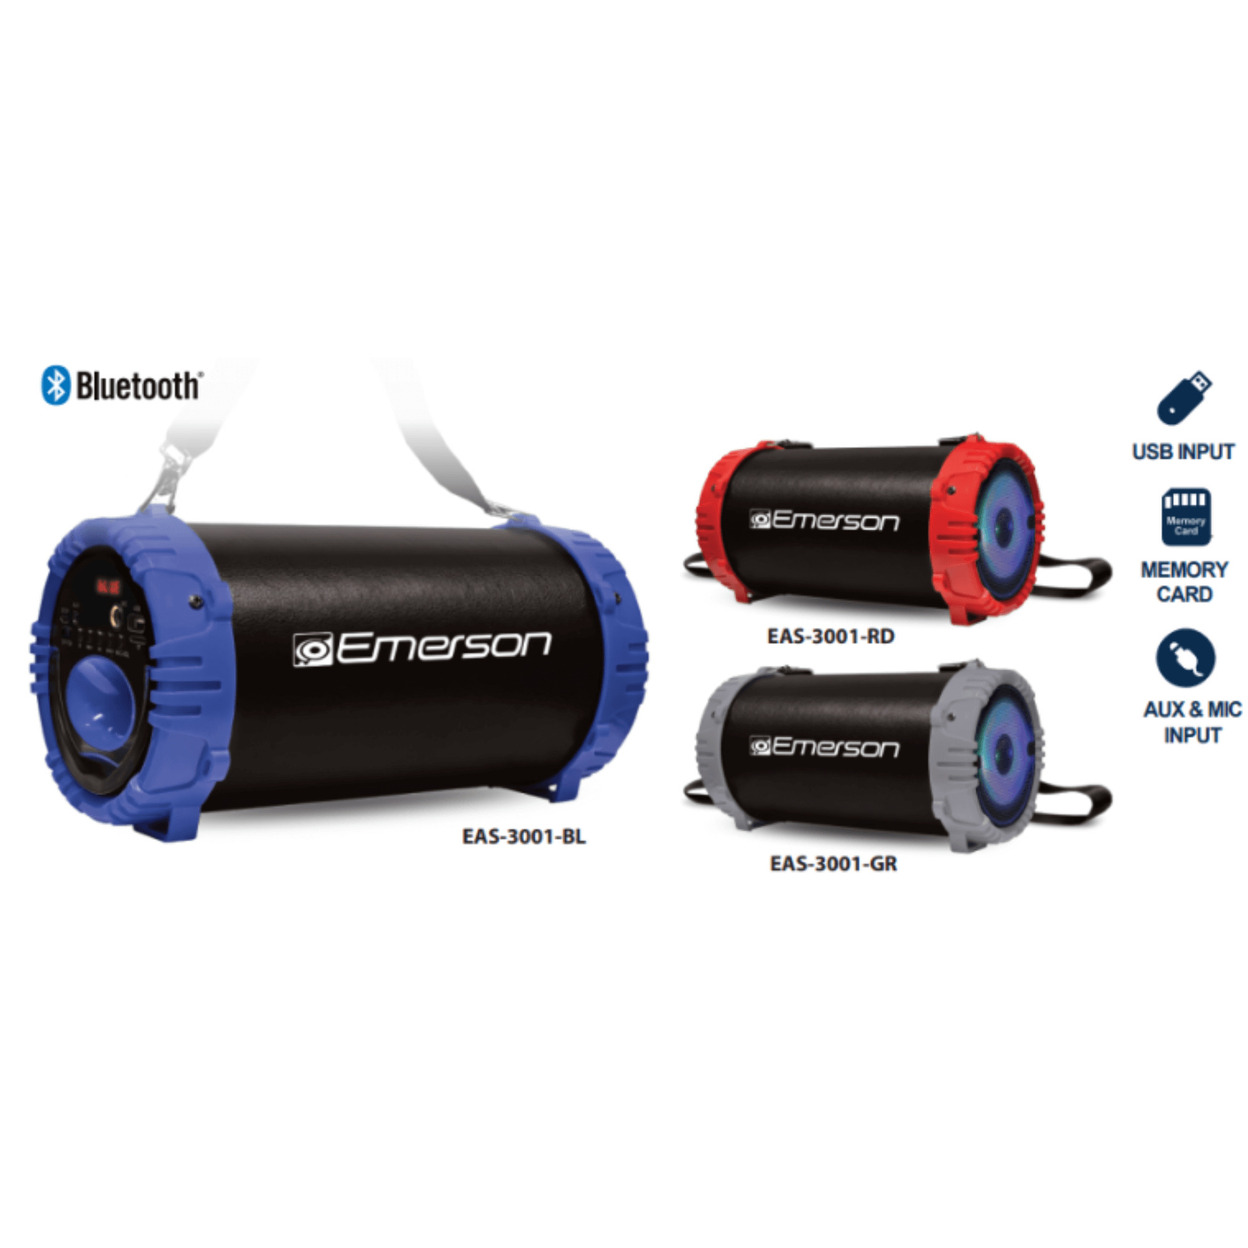 Emerson Portable Bluetooth Speaker With LED Lighting And Carrying Strap - Blue